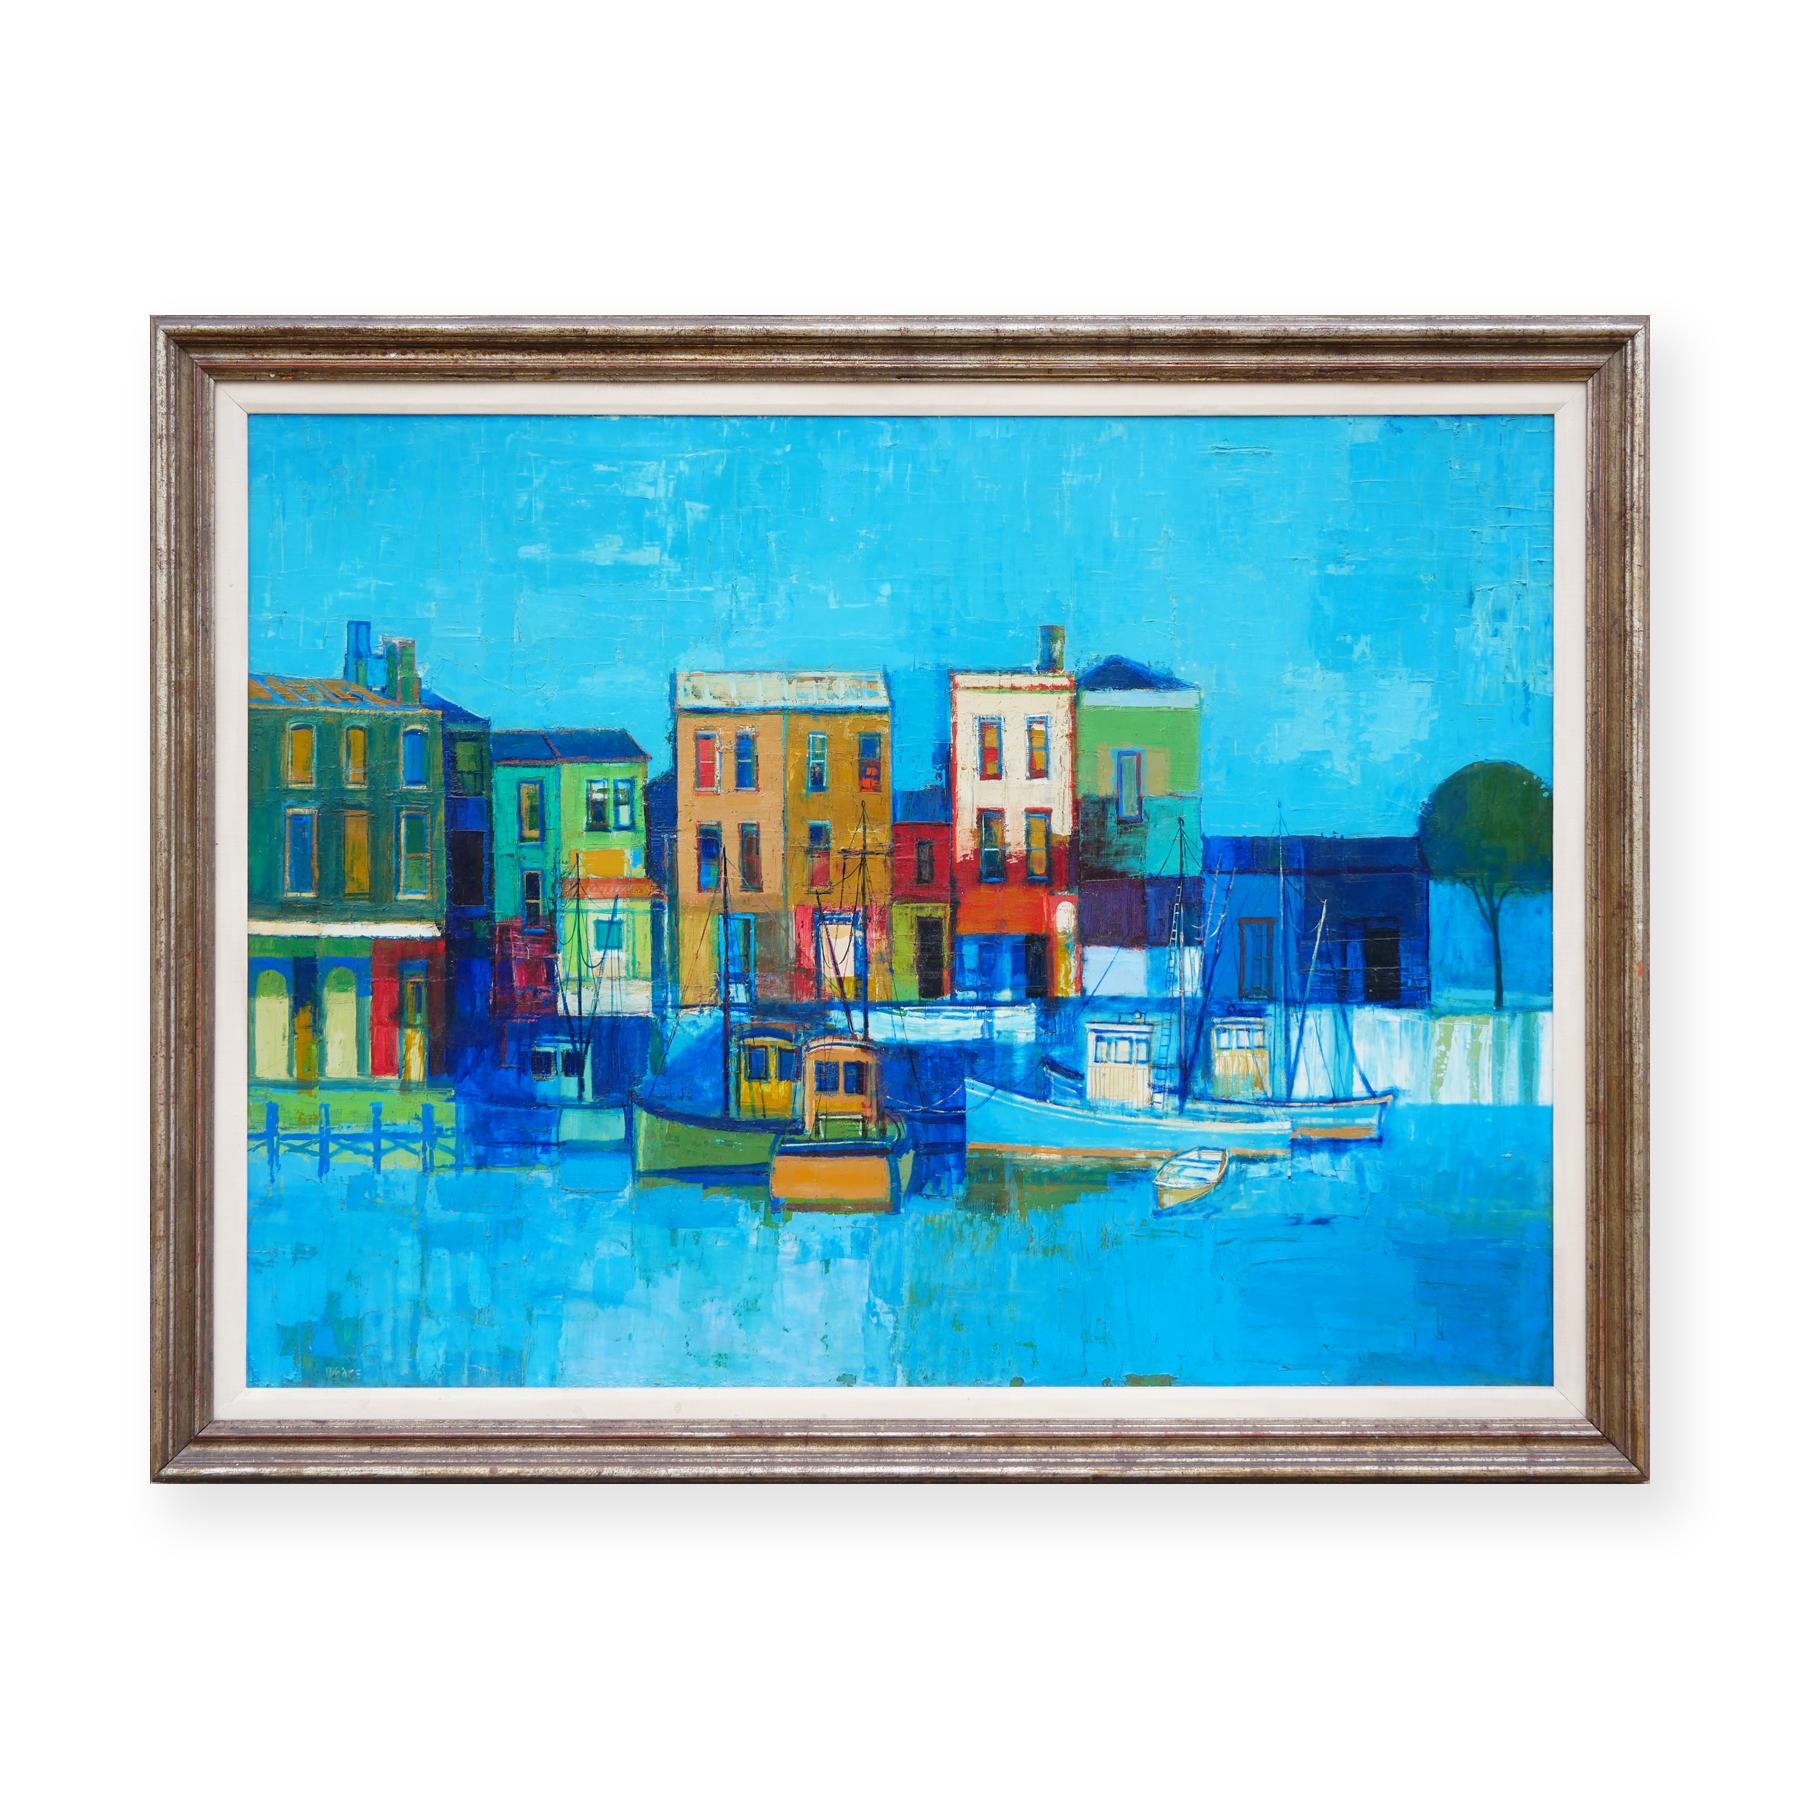 Modern Blue-Toned Abstract Coastal Cityscape Landscape with Boats at a Dock - Painting by Herb Mears